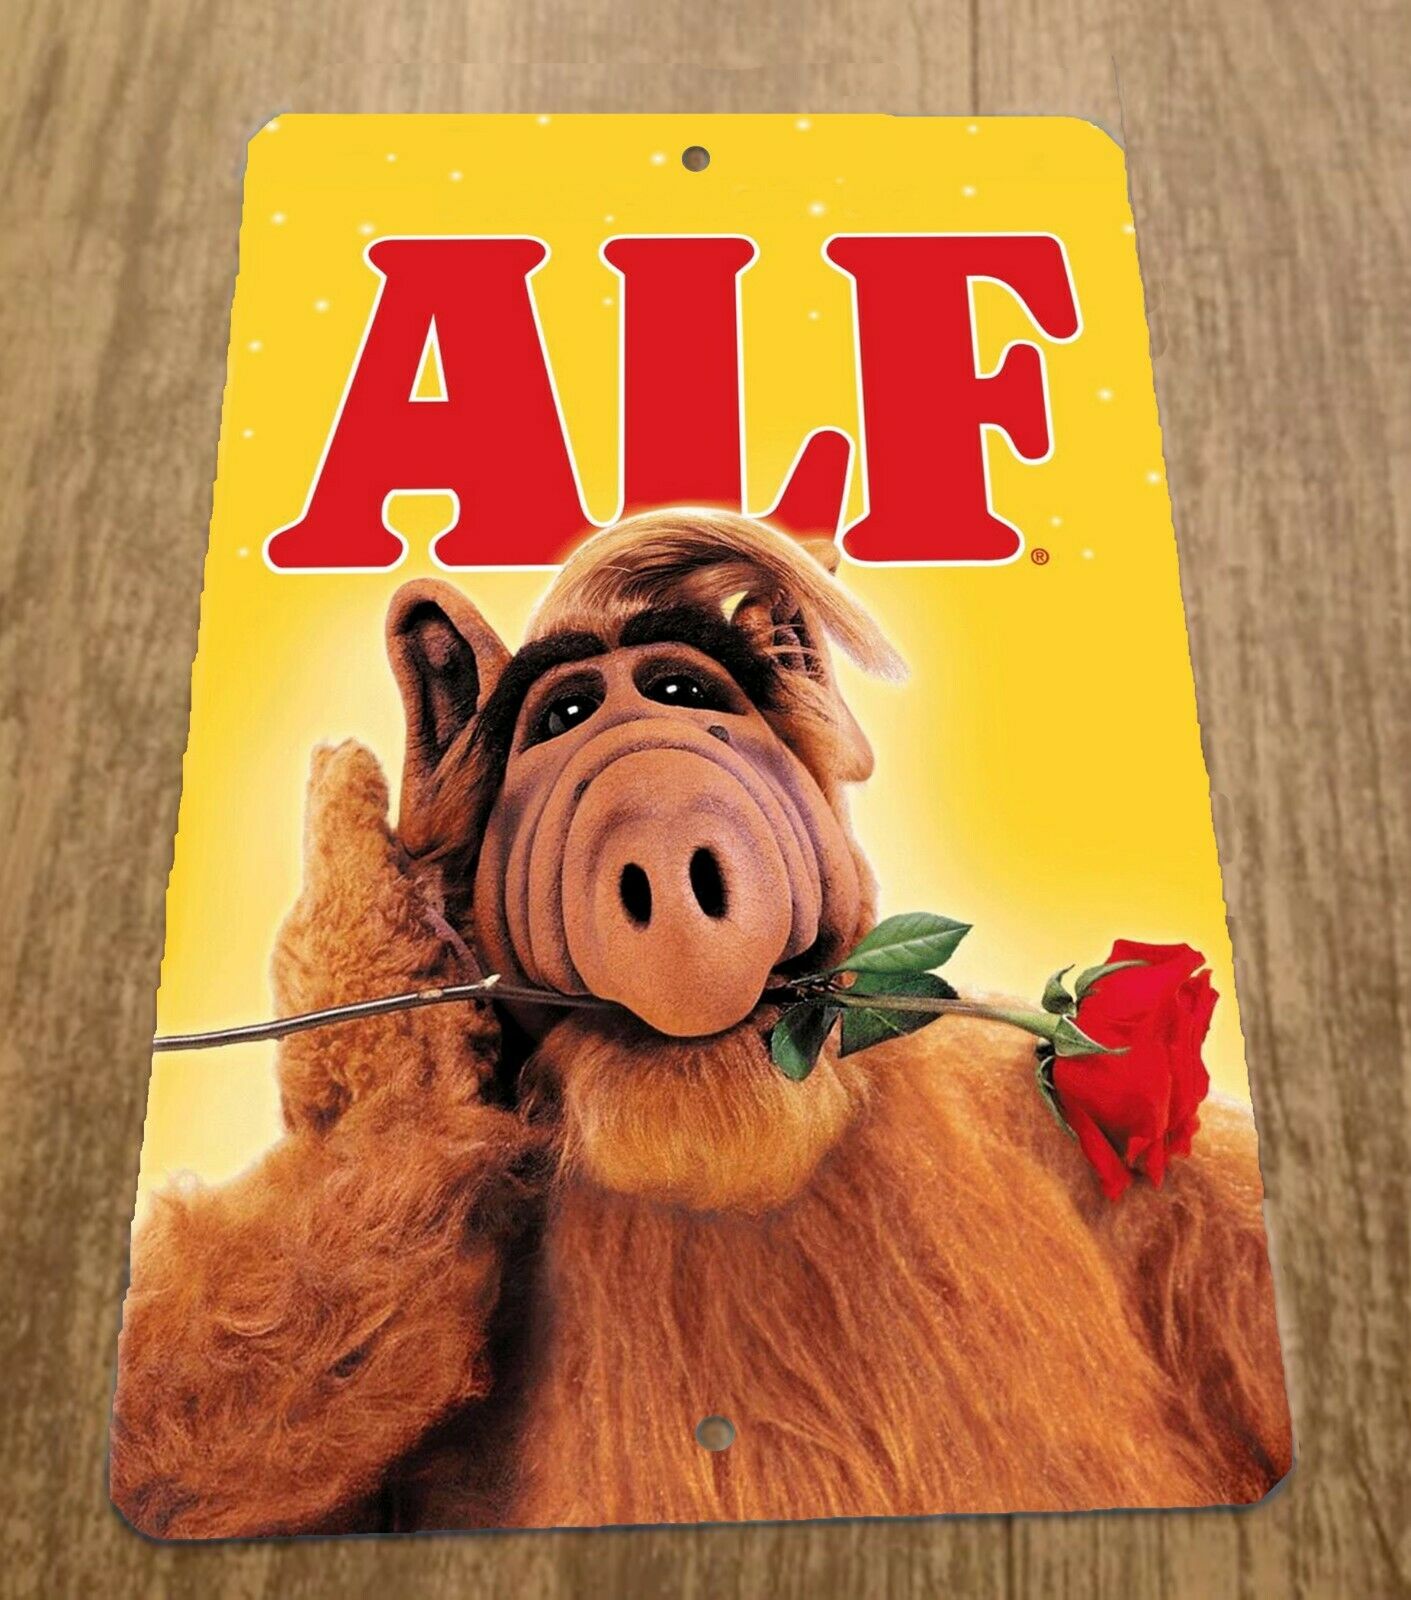 ALF Sitcom Comedy TV Show Alien Life From 8x12 Metal Wall Sign